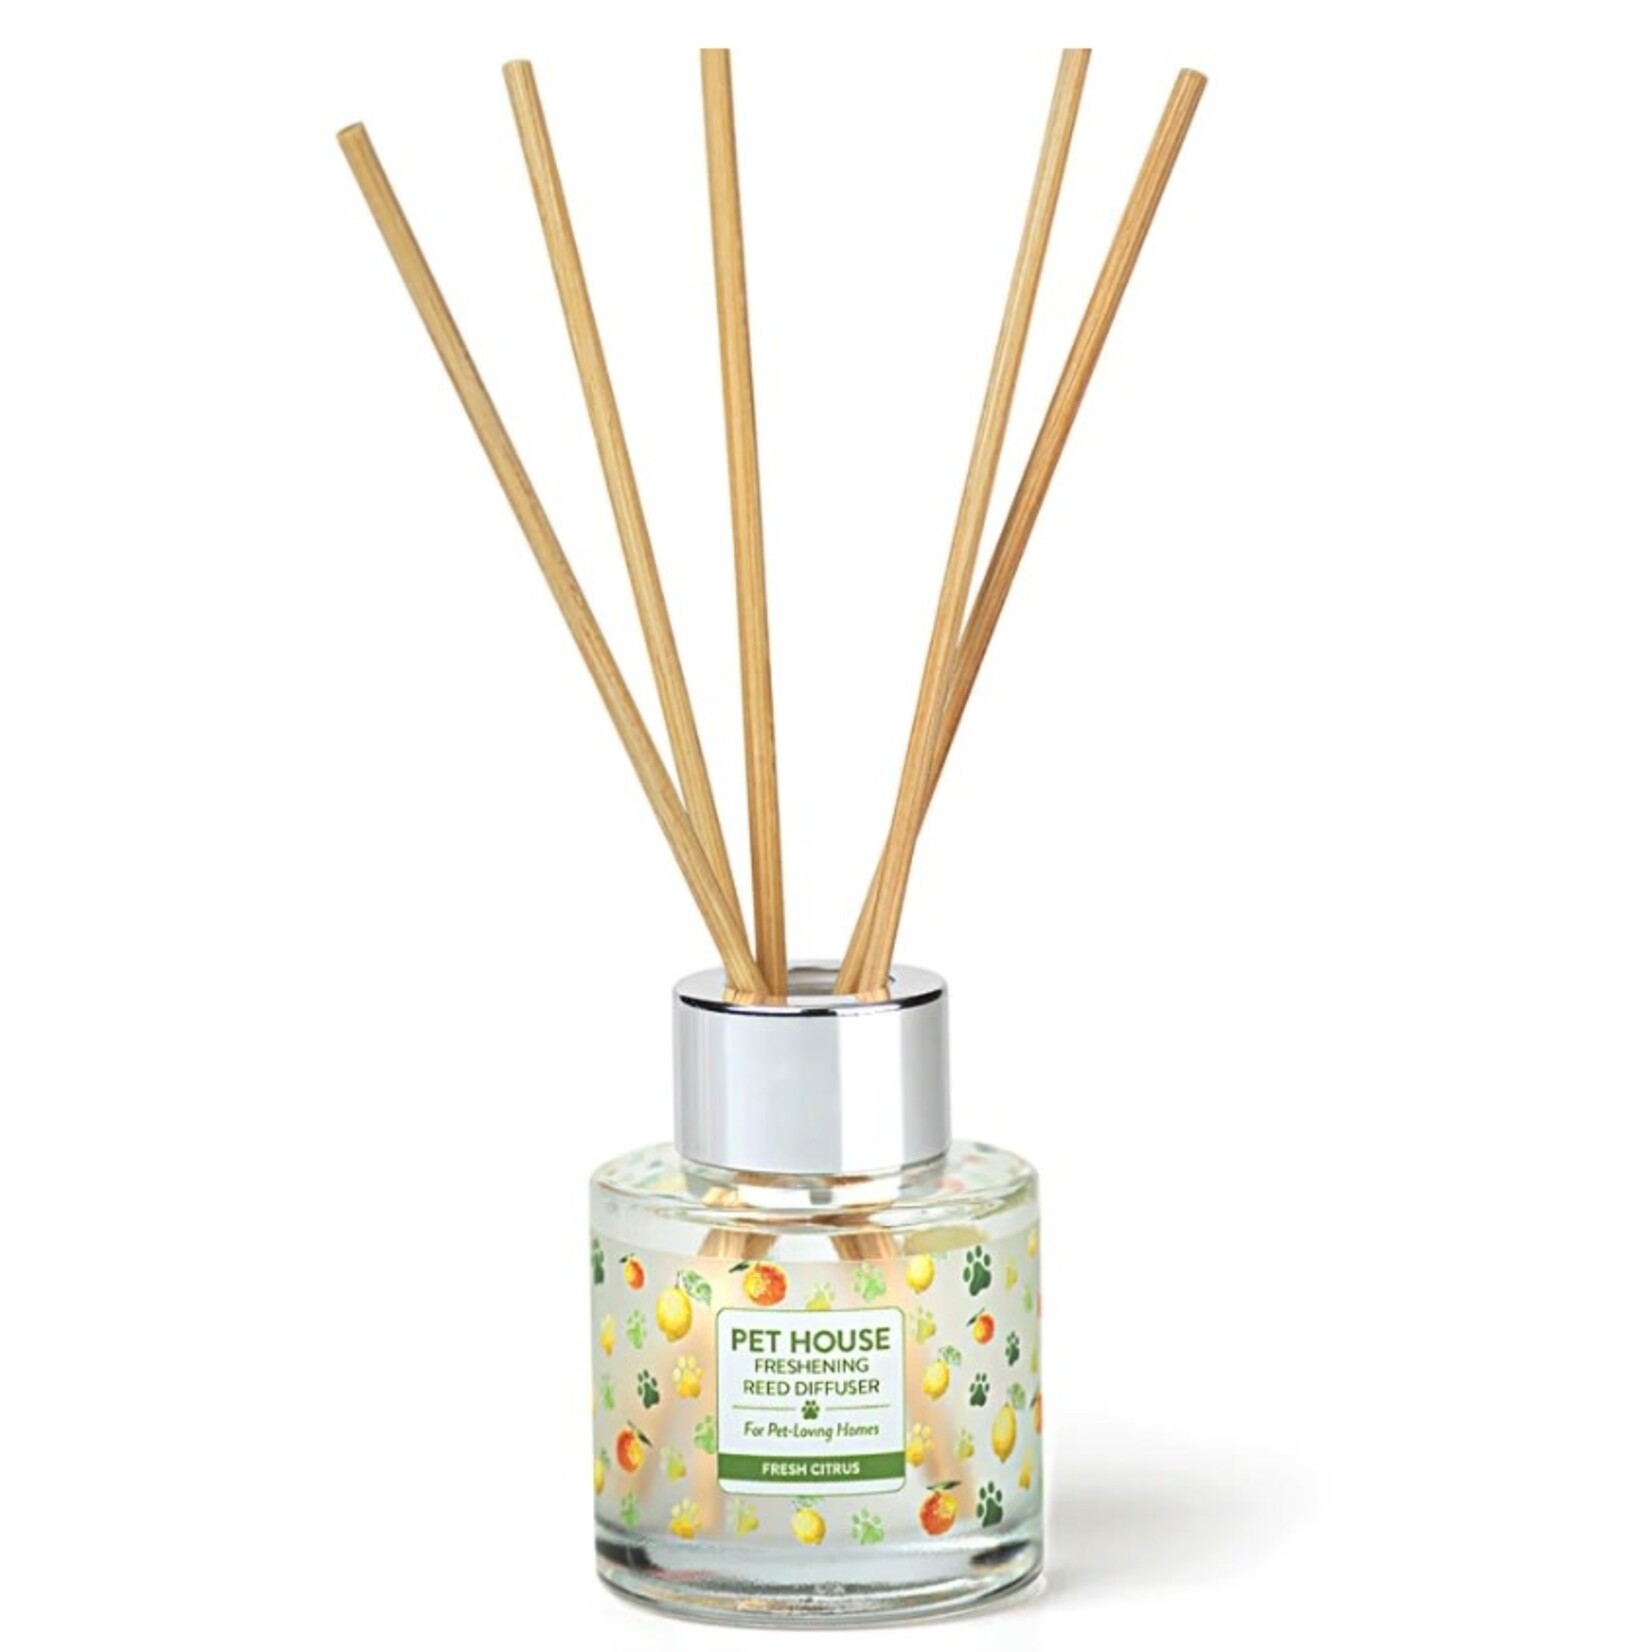 PET HOUSE CANDLE Pet House Reed Diffuser Fresh Citrus